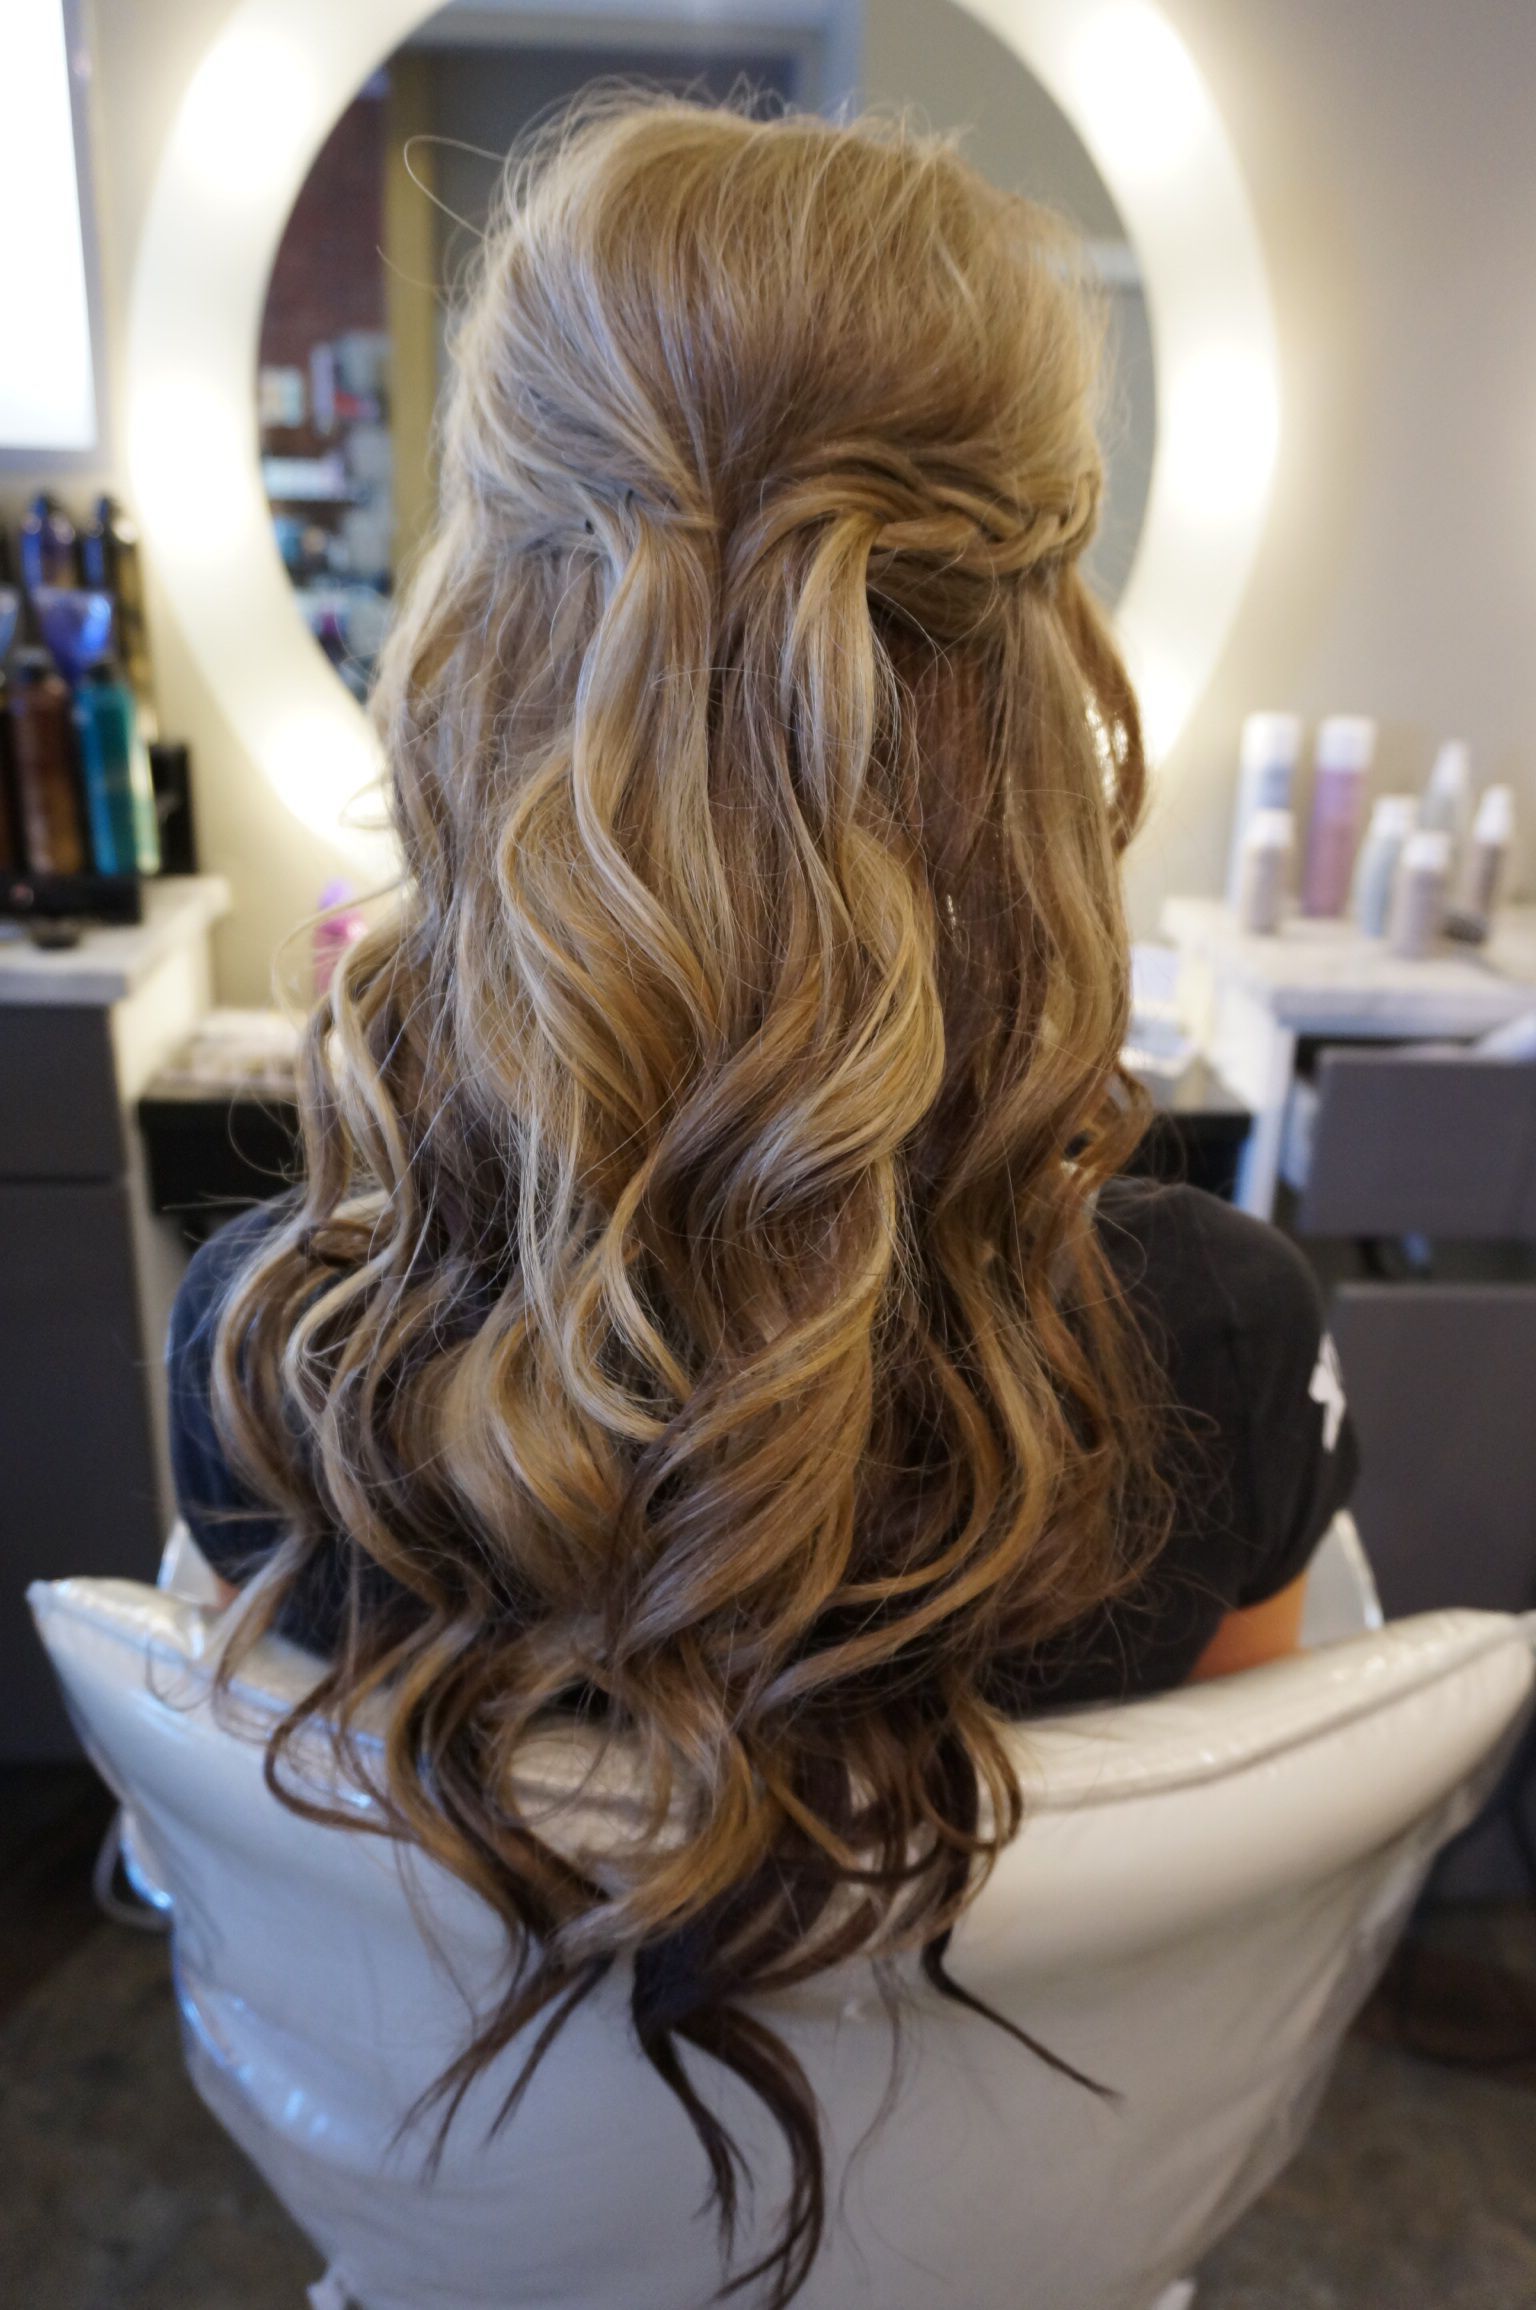 Well Known Loose Messy Waves Prom Hairstyles Inside Hairstyles : Wavy Hair For Bridesmaids Superb Long Hair With Loose (View 12 of 20)